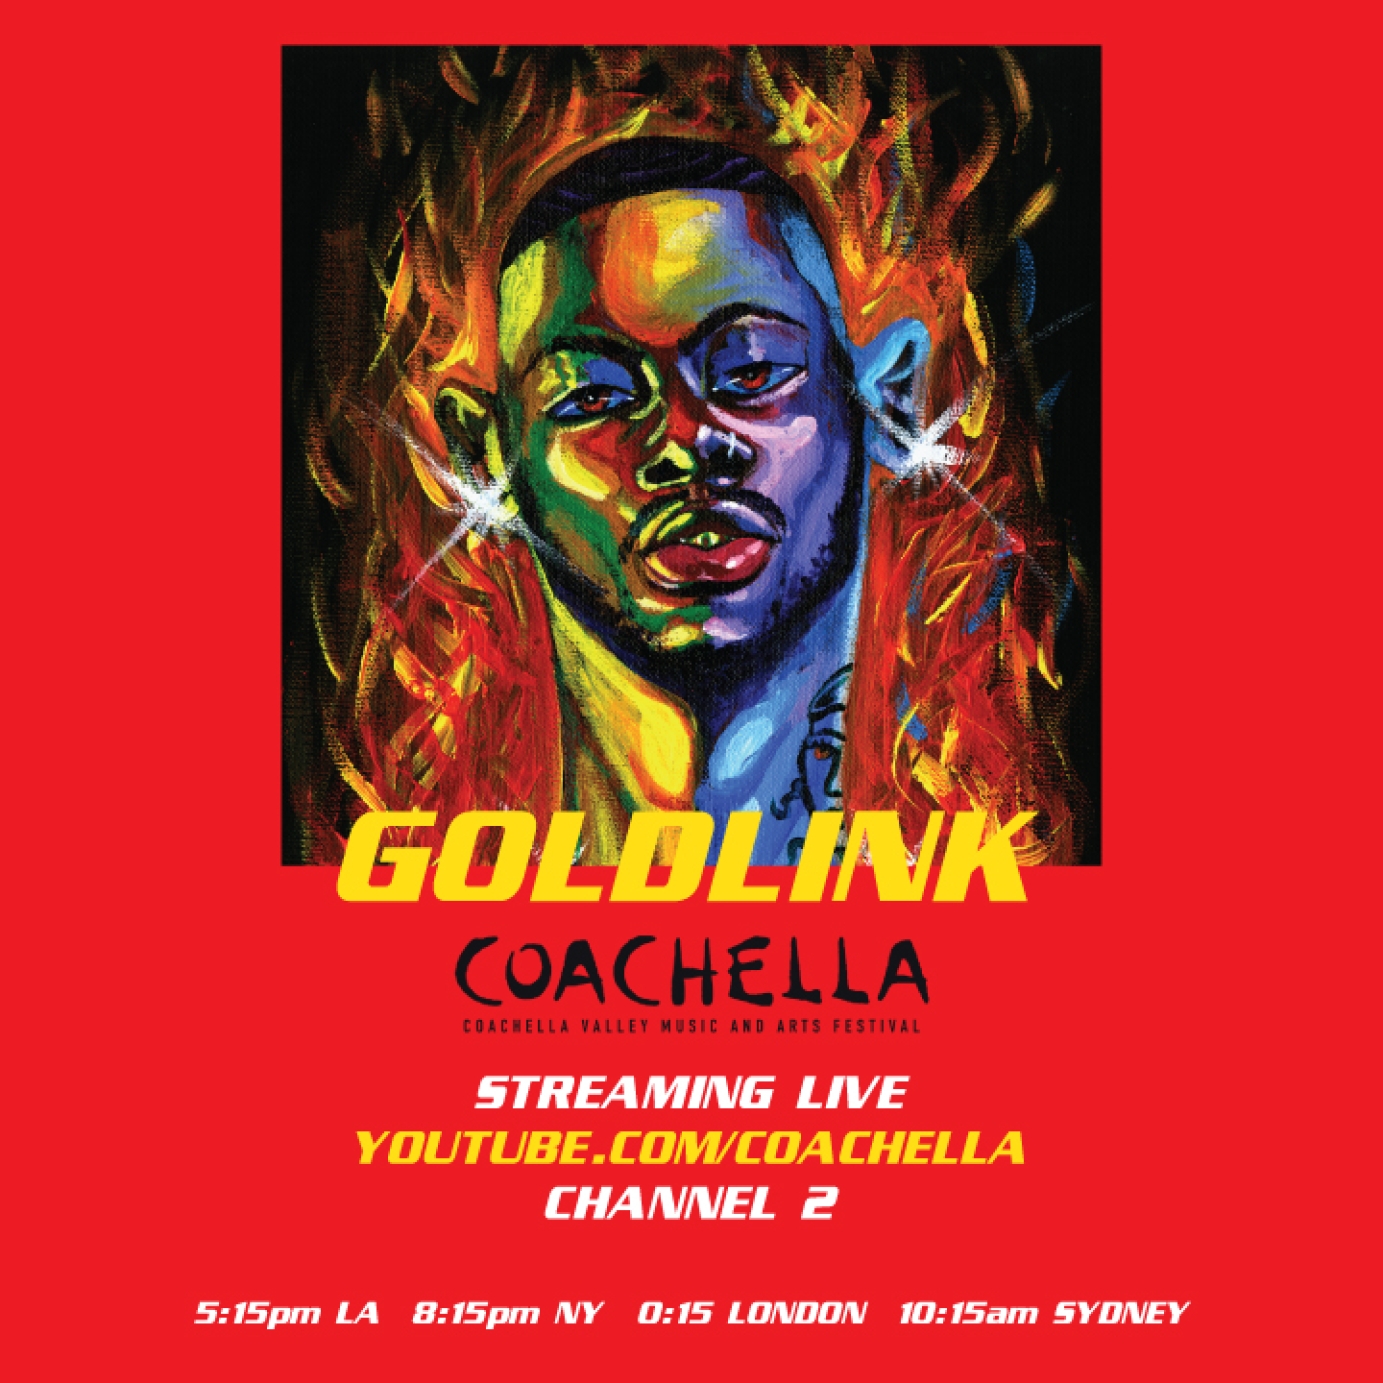 GoldLink "At What Cost" Posters